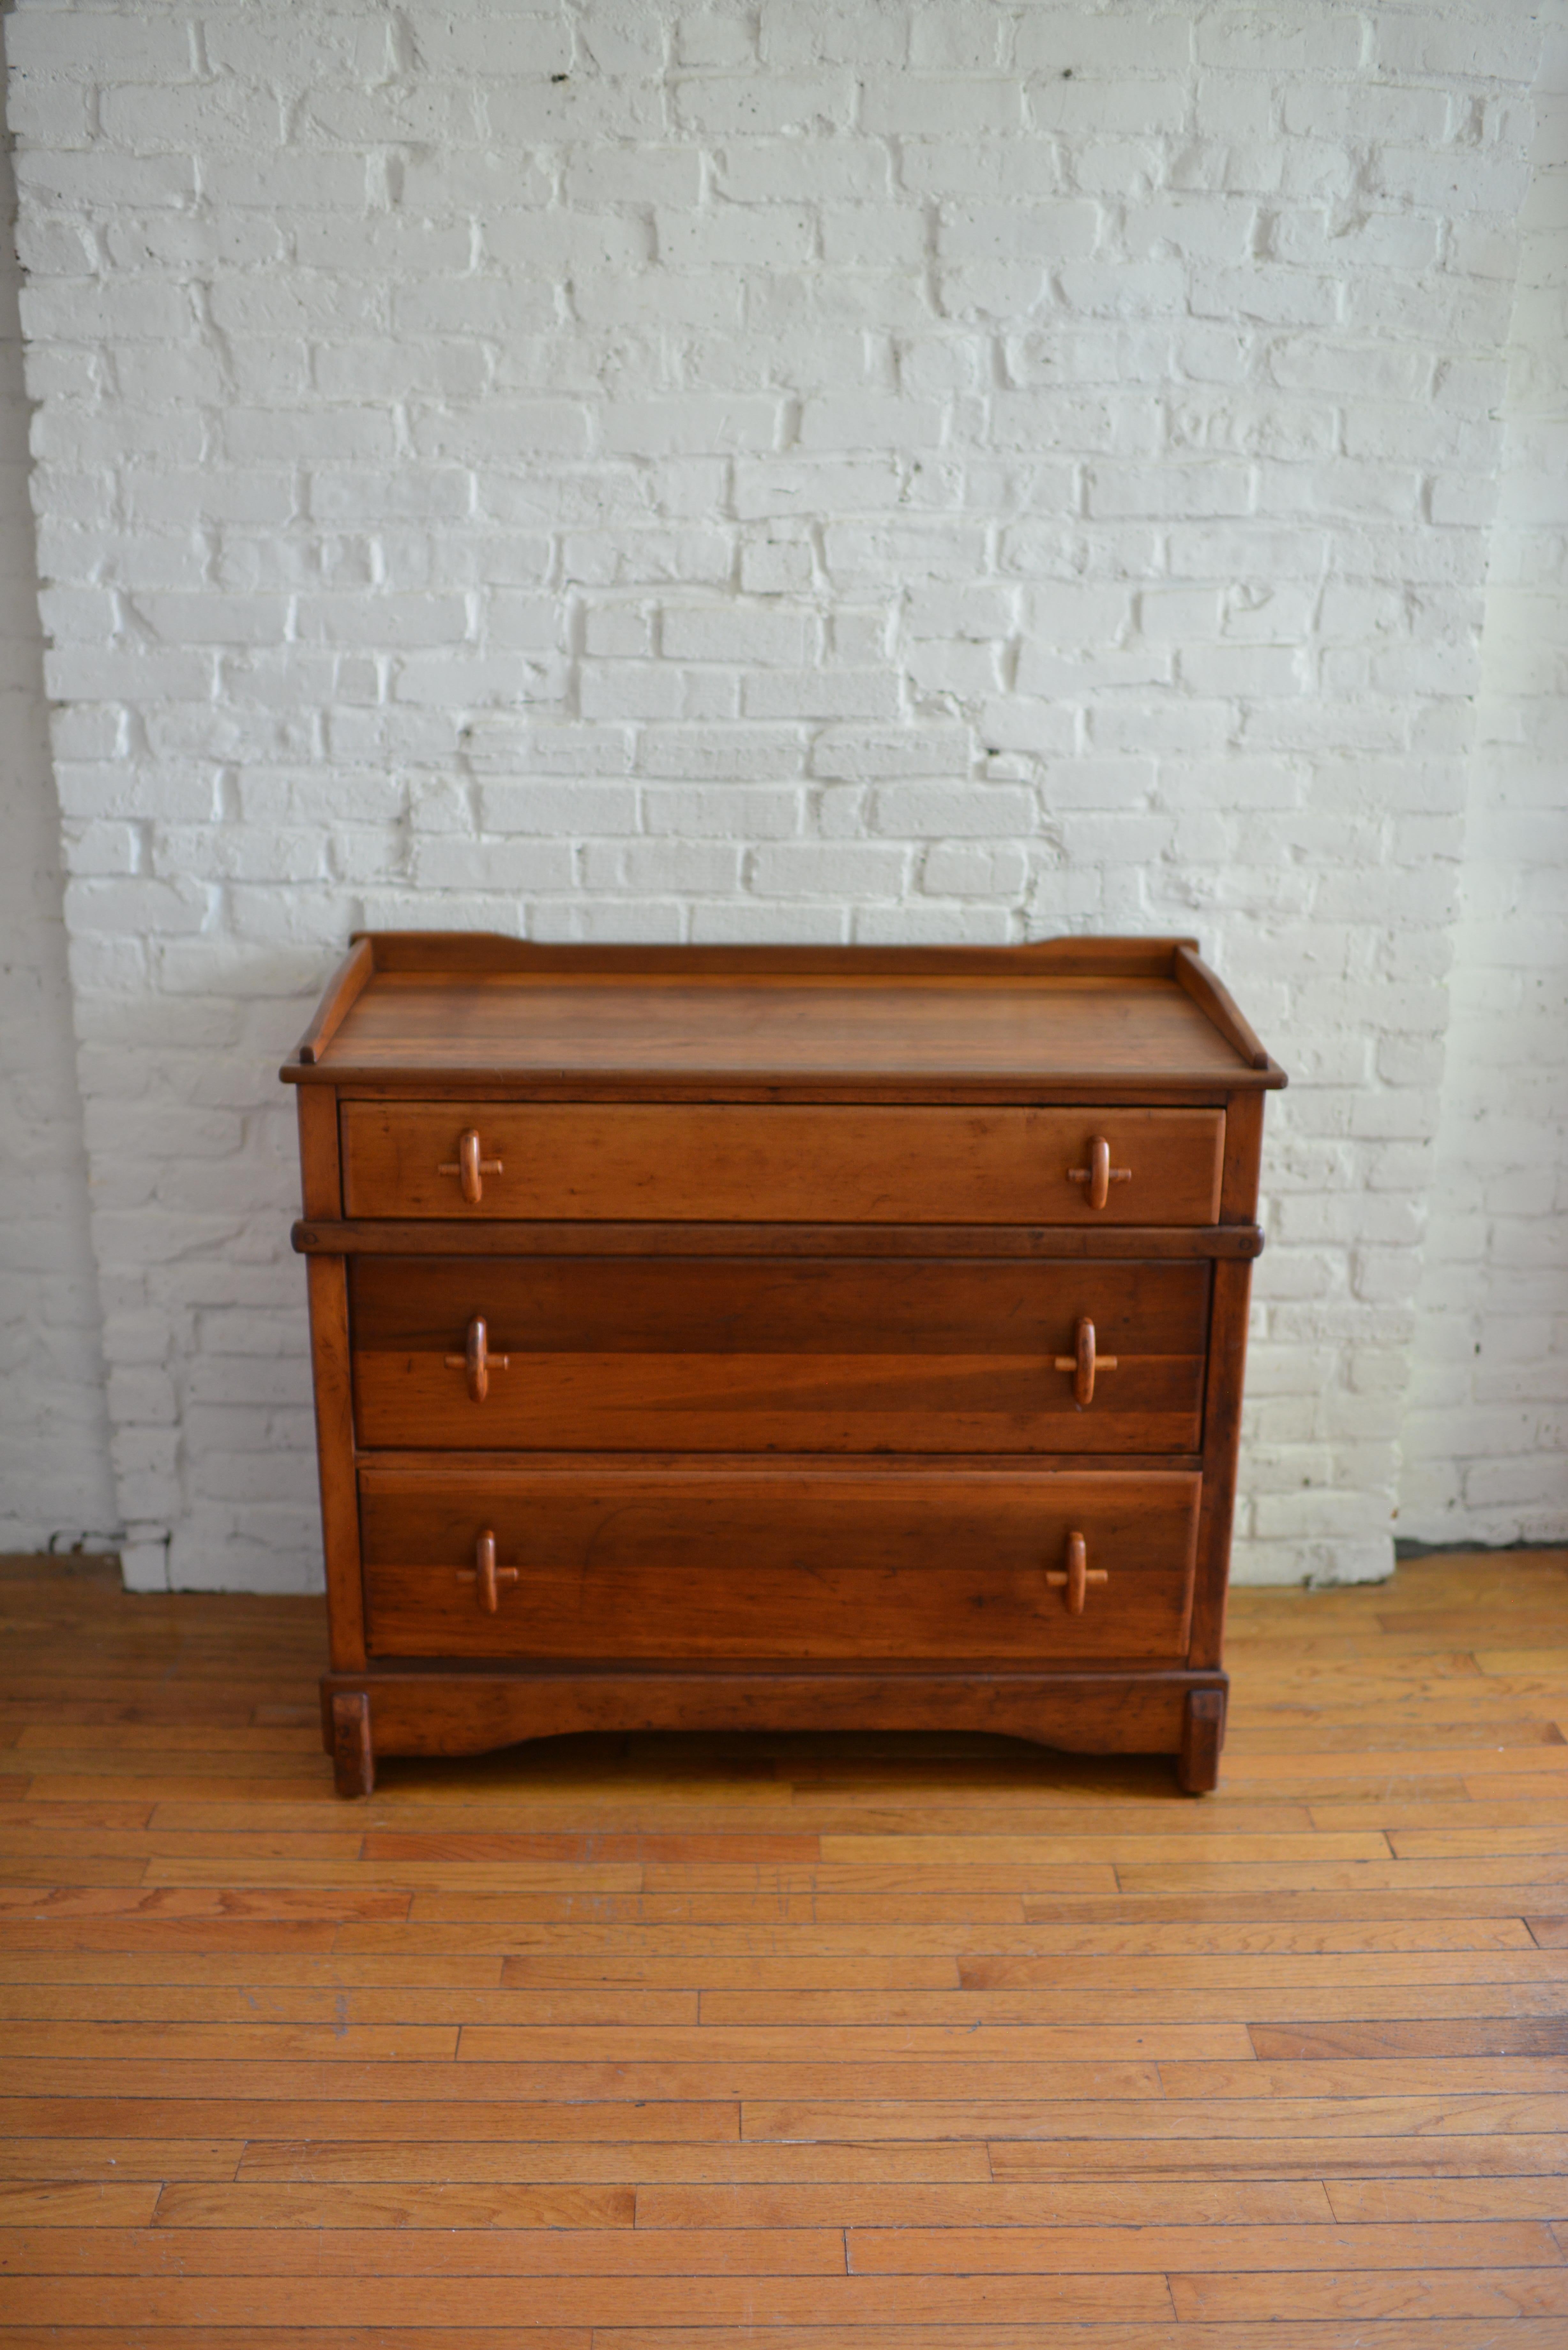 Exquisite early 20th century solid wood chest of drawers. This solidly constructed piece features beautifully turned cross pull handles and dovetail joints. The piece has three generously-sized drawers, block feet and a simply carved apron front.